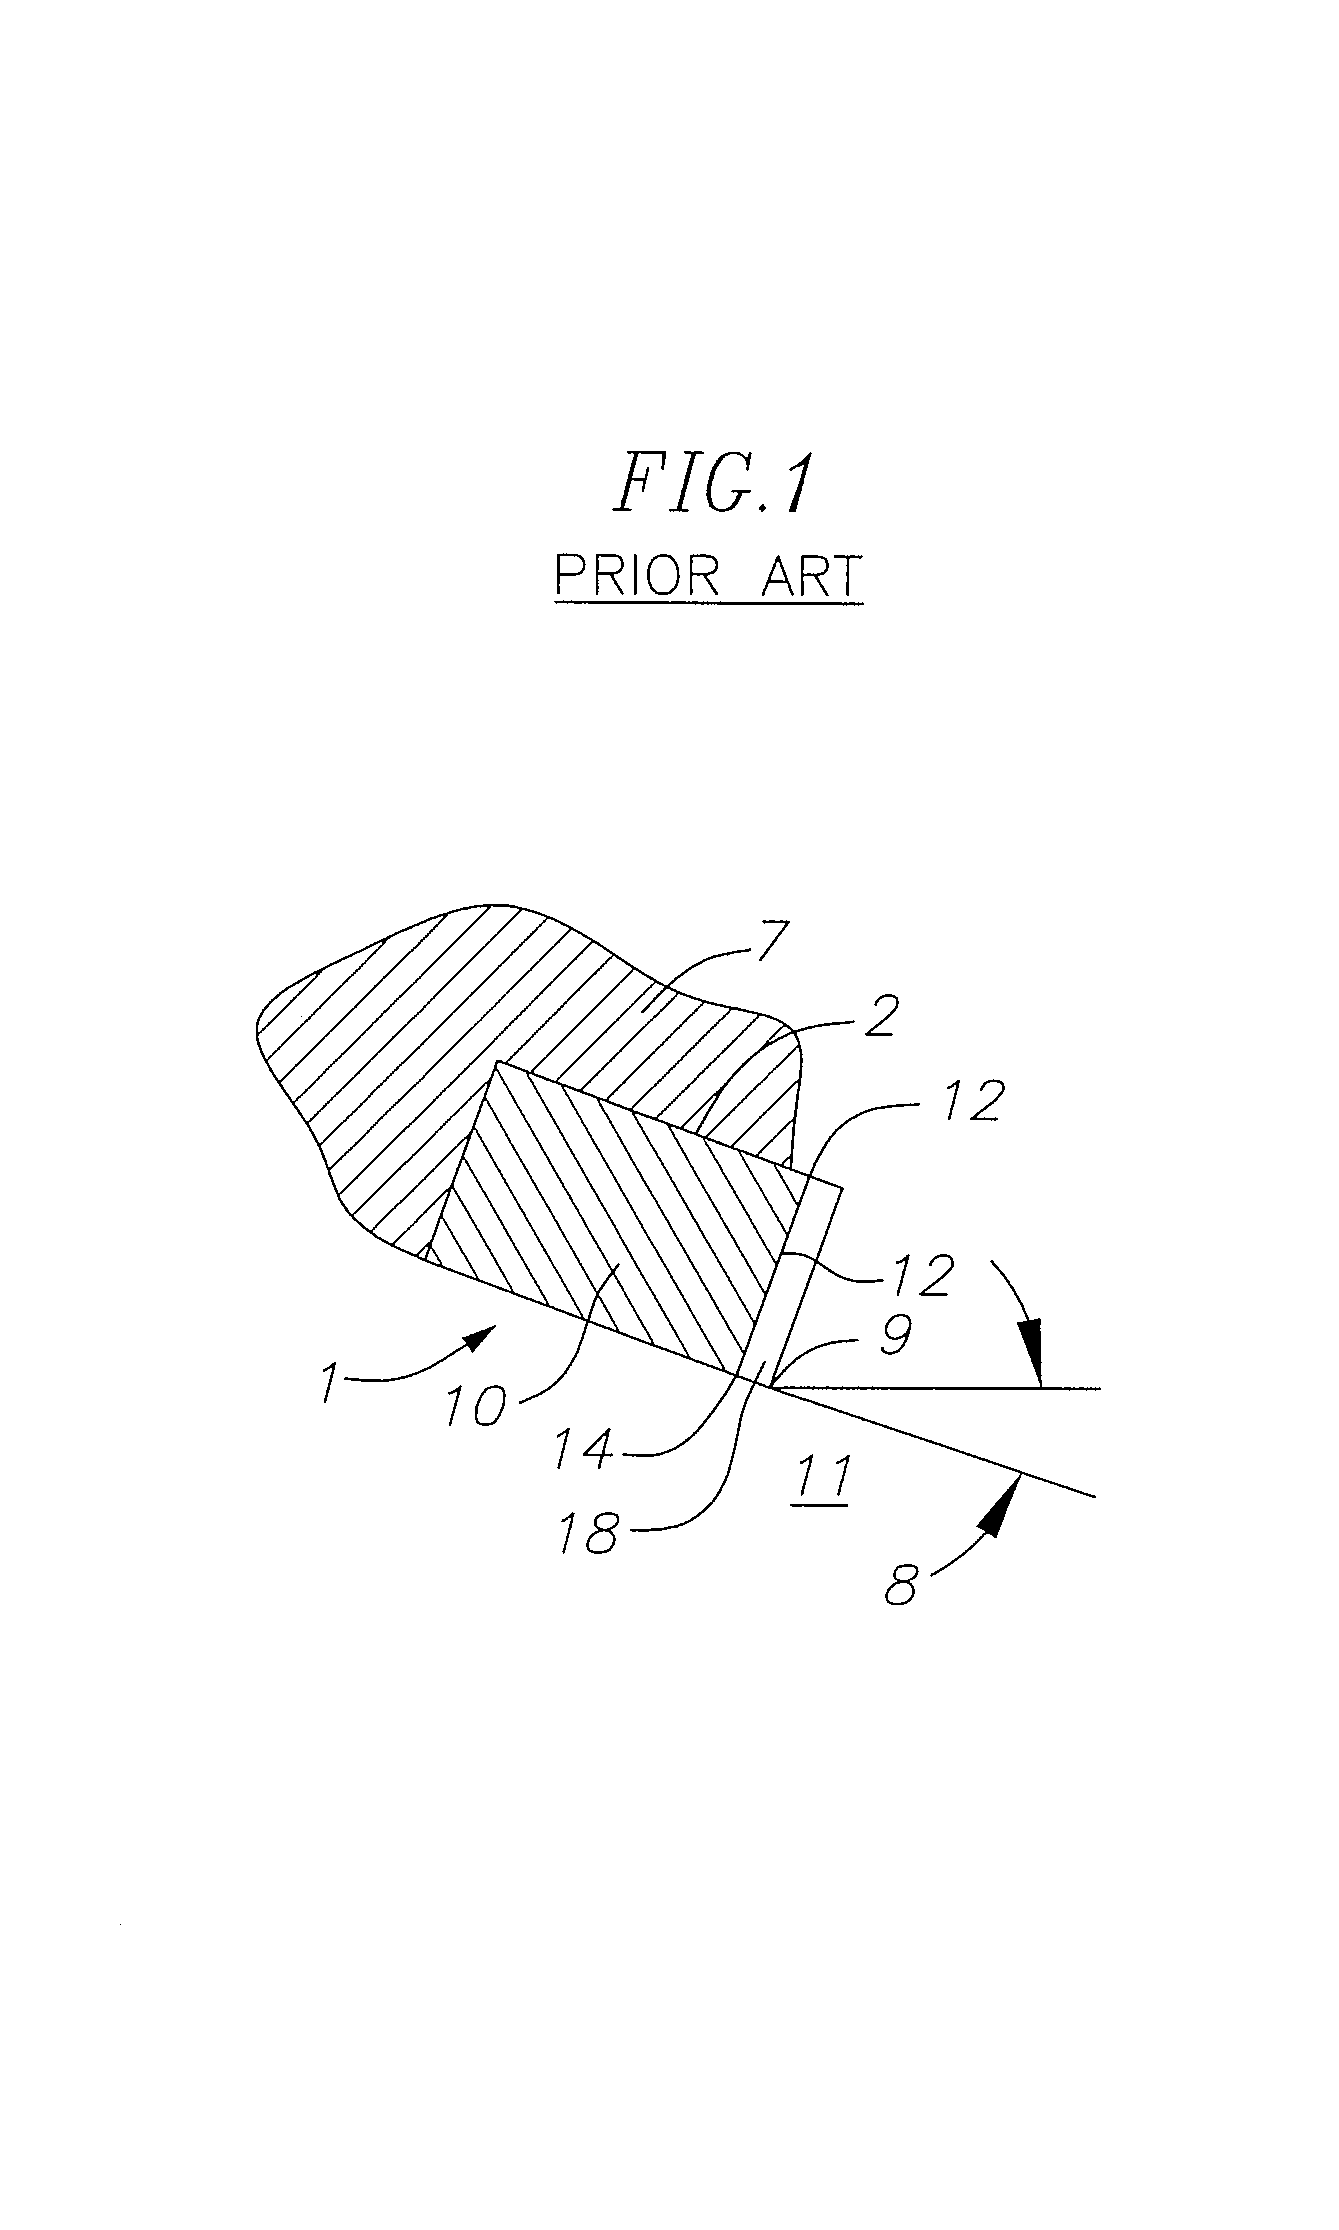 Thermally stable polycrystalline diamond cutting elements and bits incorporating the same